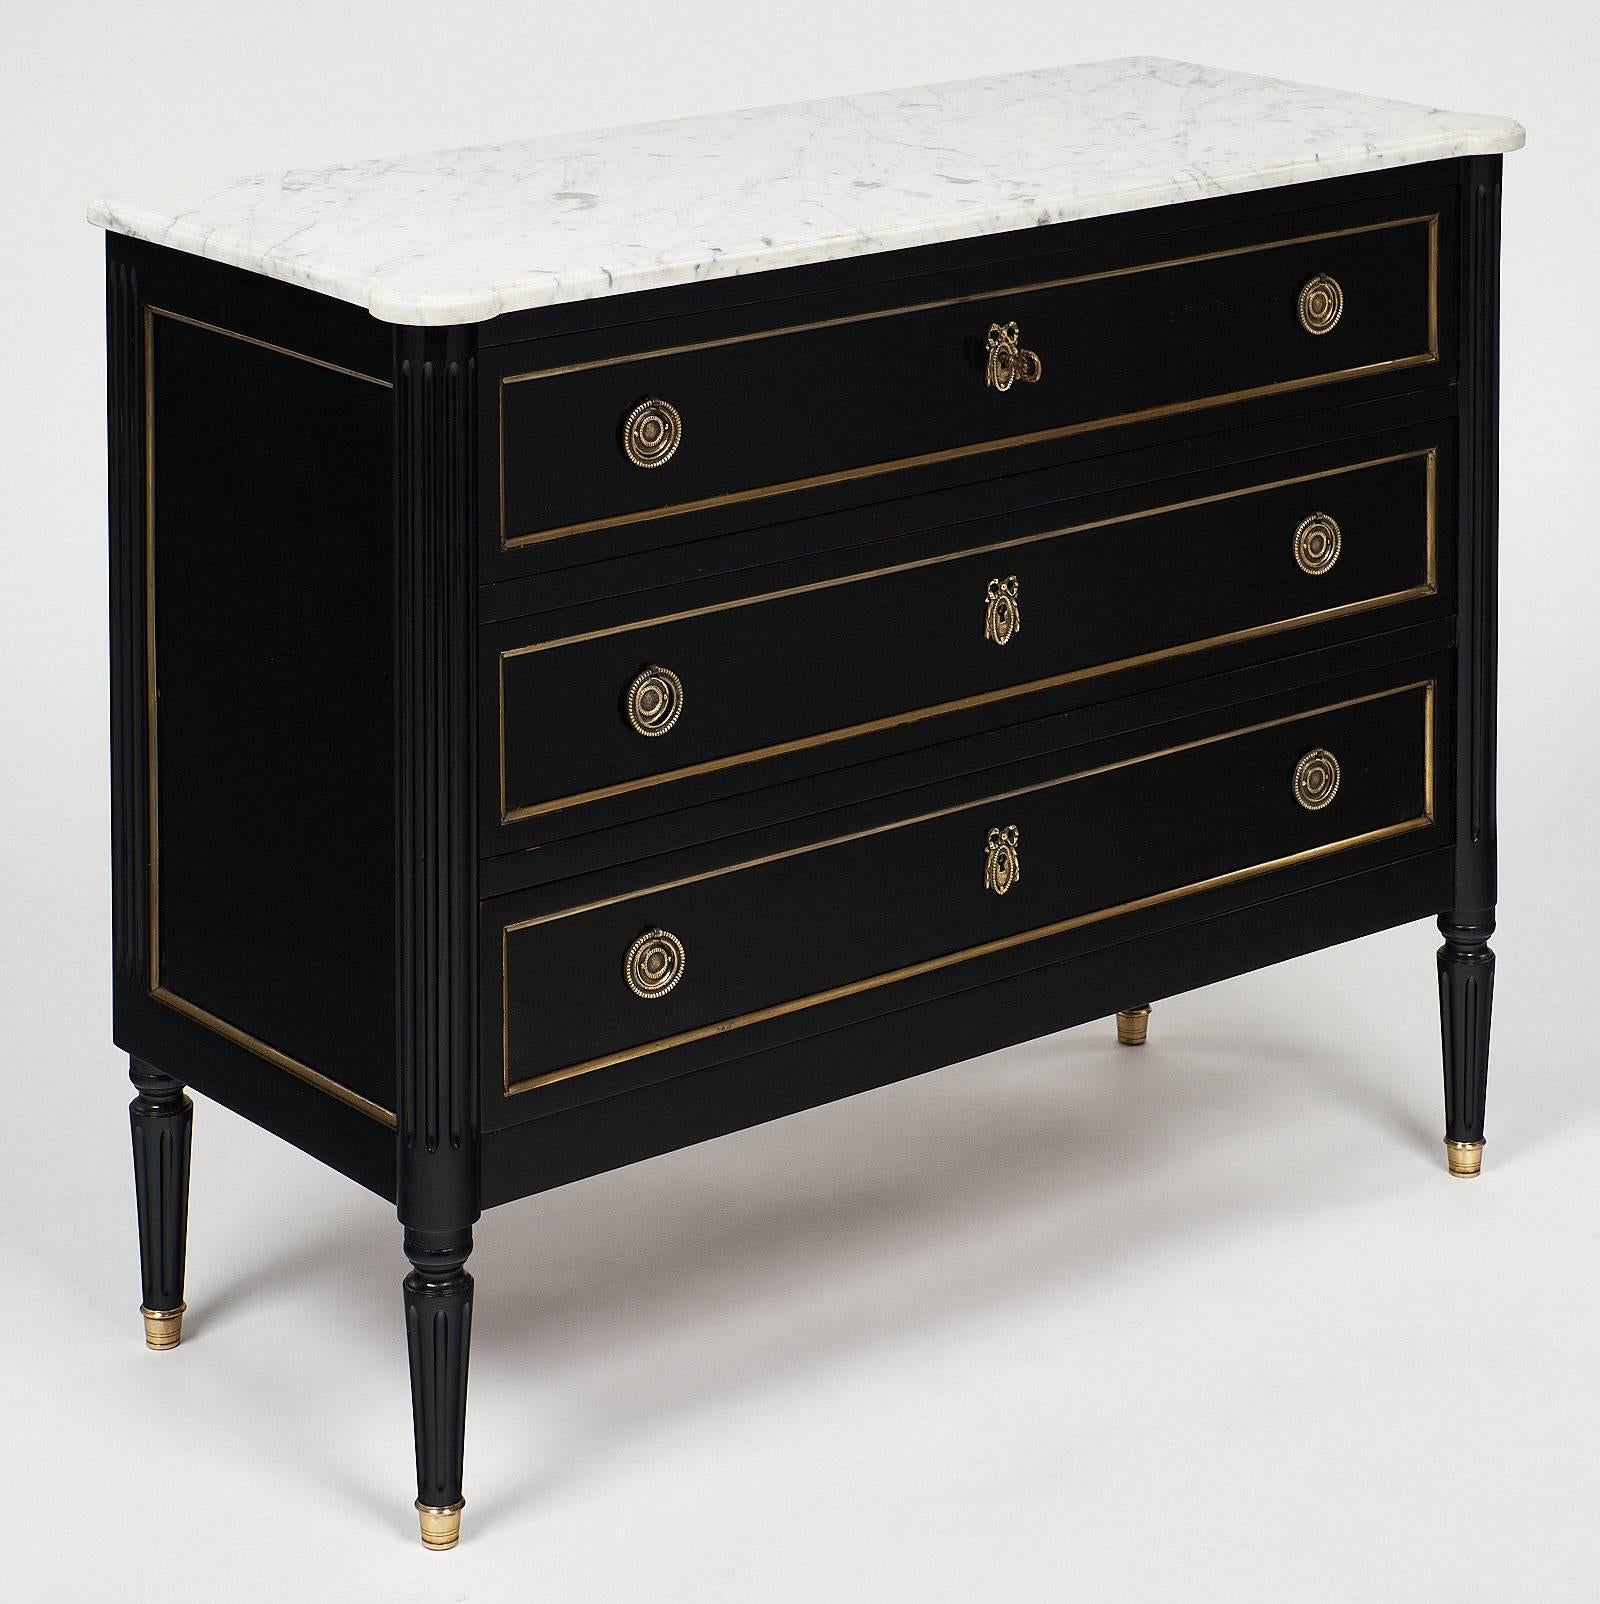 French antique Louis XVI style chest with original Carrara marble top. This 19th century mahogany piece is ebonized and finished with a hand-rubbed French polish. The brass hardware is all original, and the single key works to lock all three drawers.